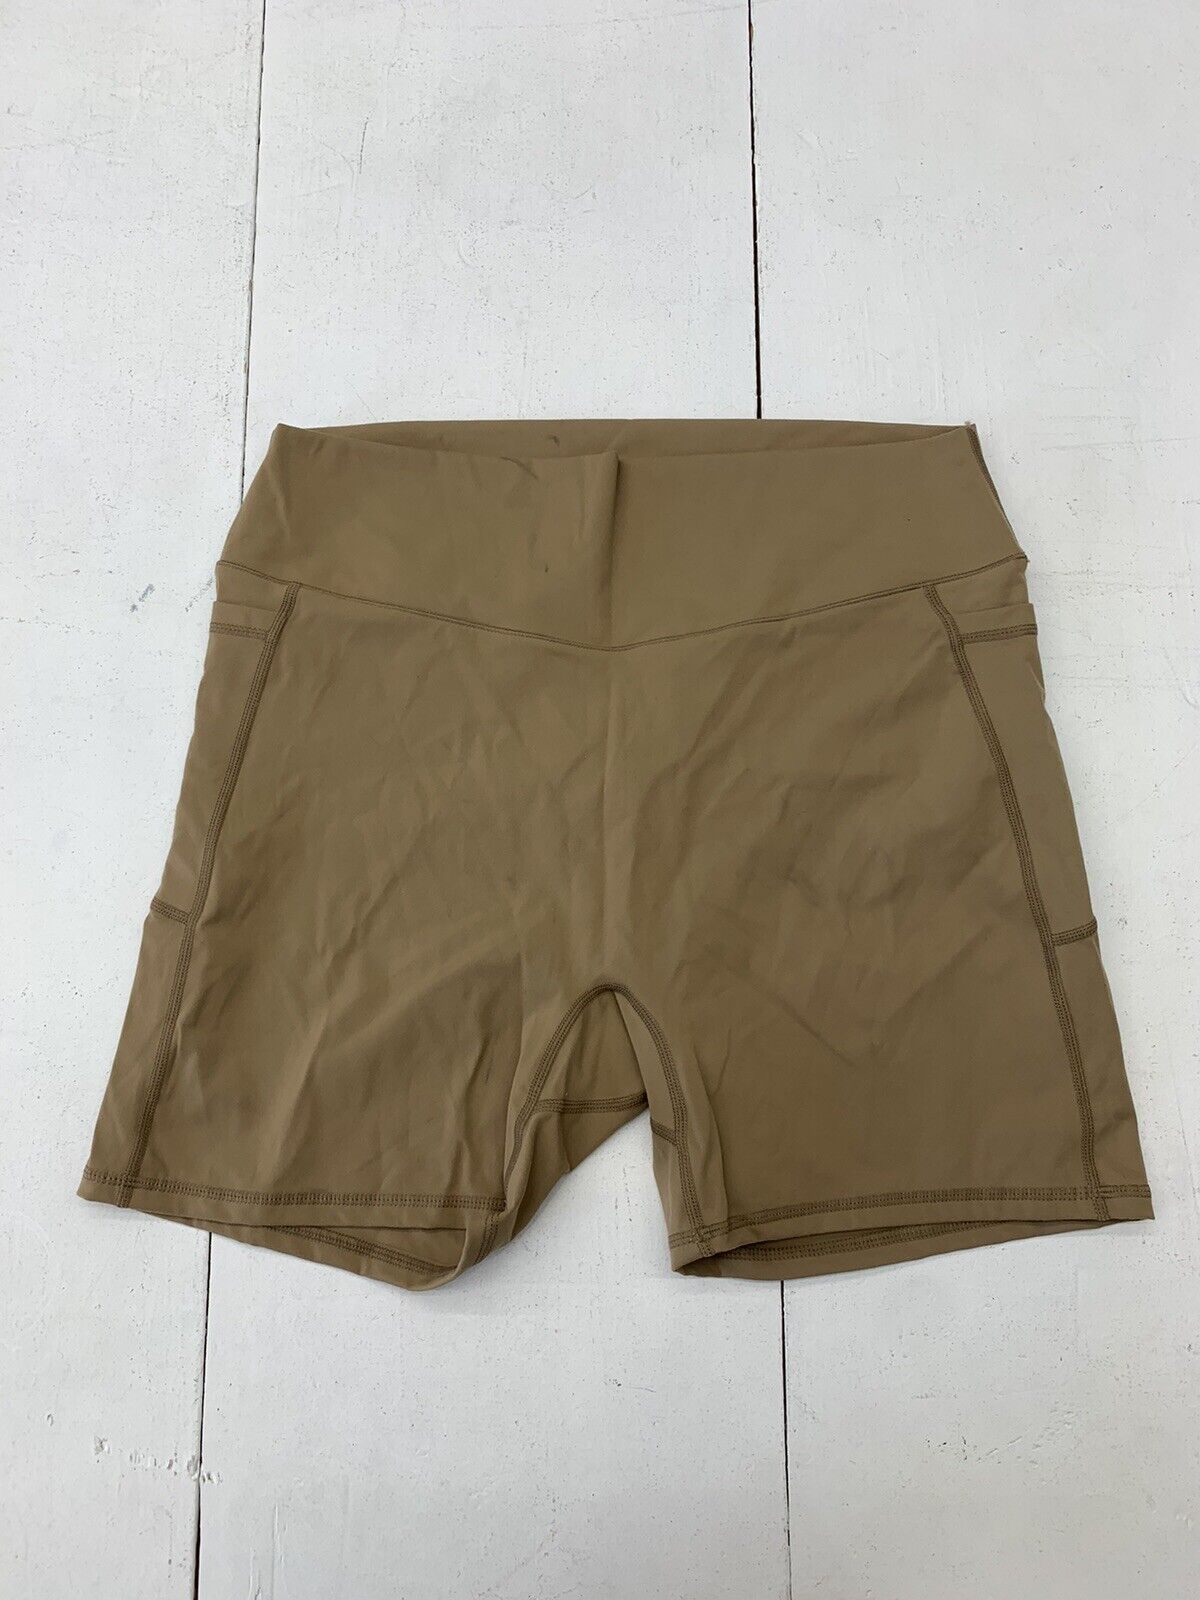 Sunzel Womens Brown Athletic Shorts Size 2XL